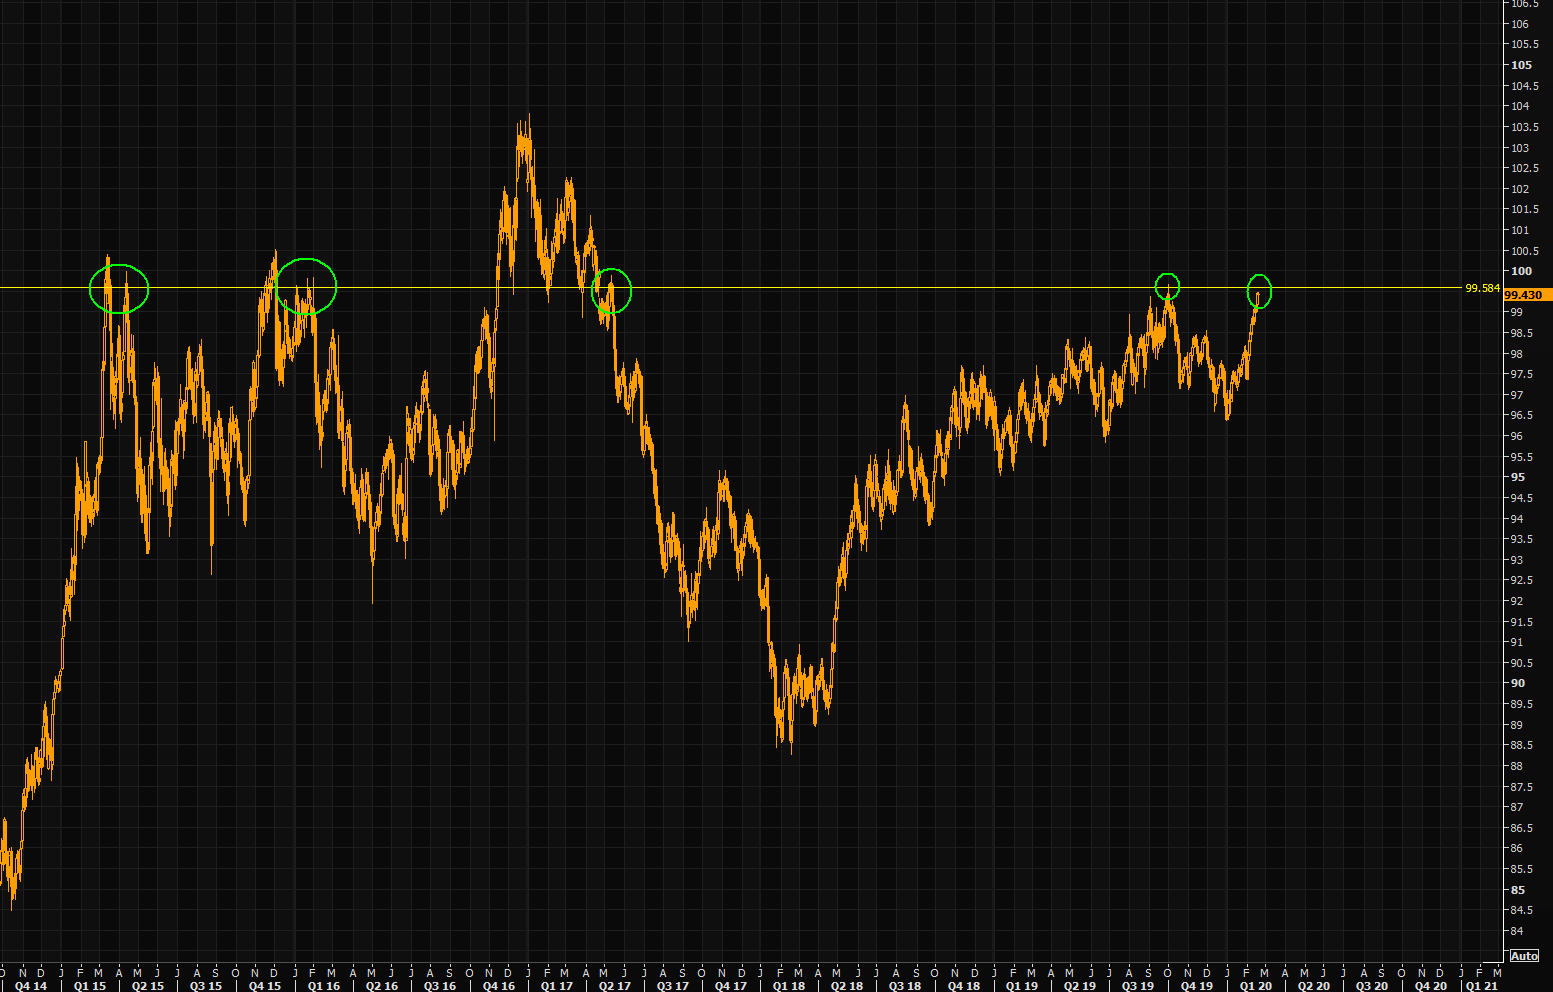 Mighty USD - approaching huge levels